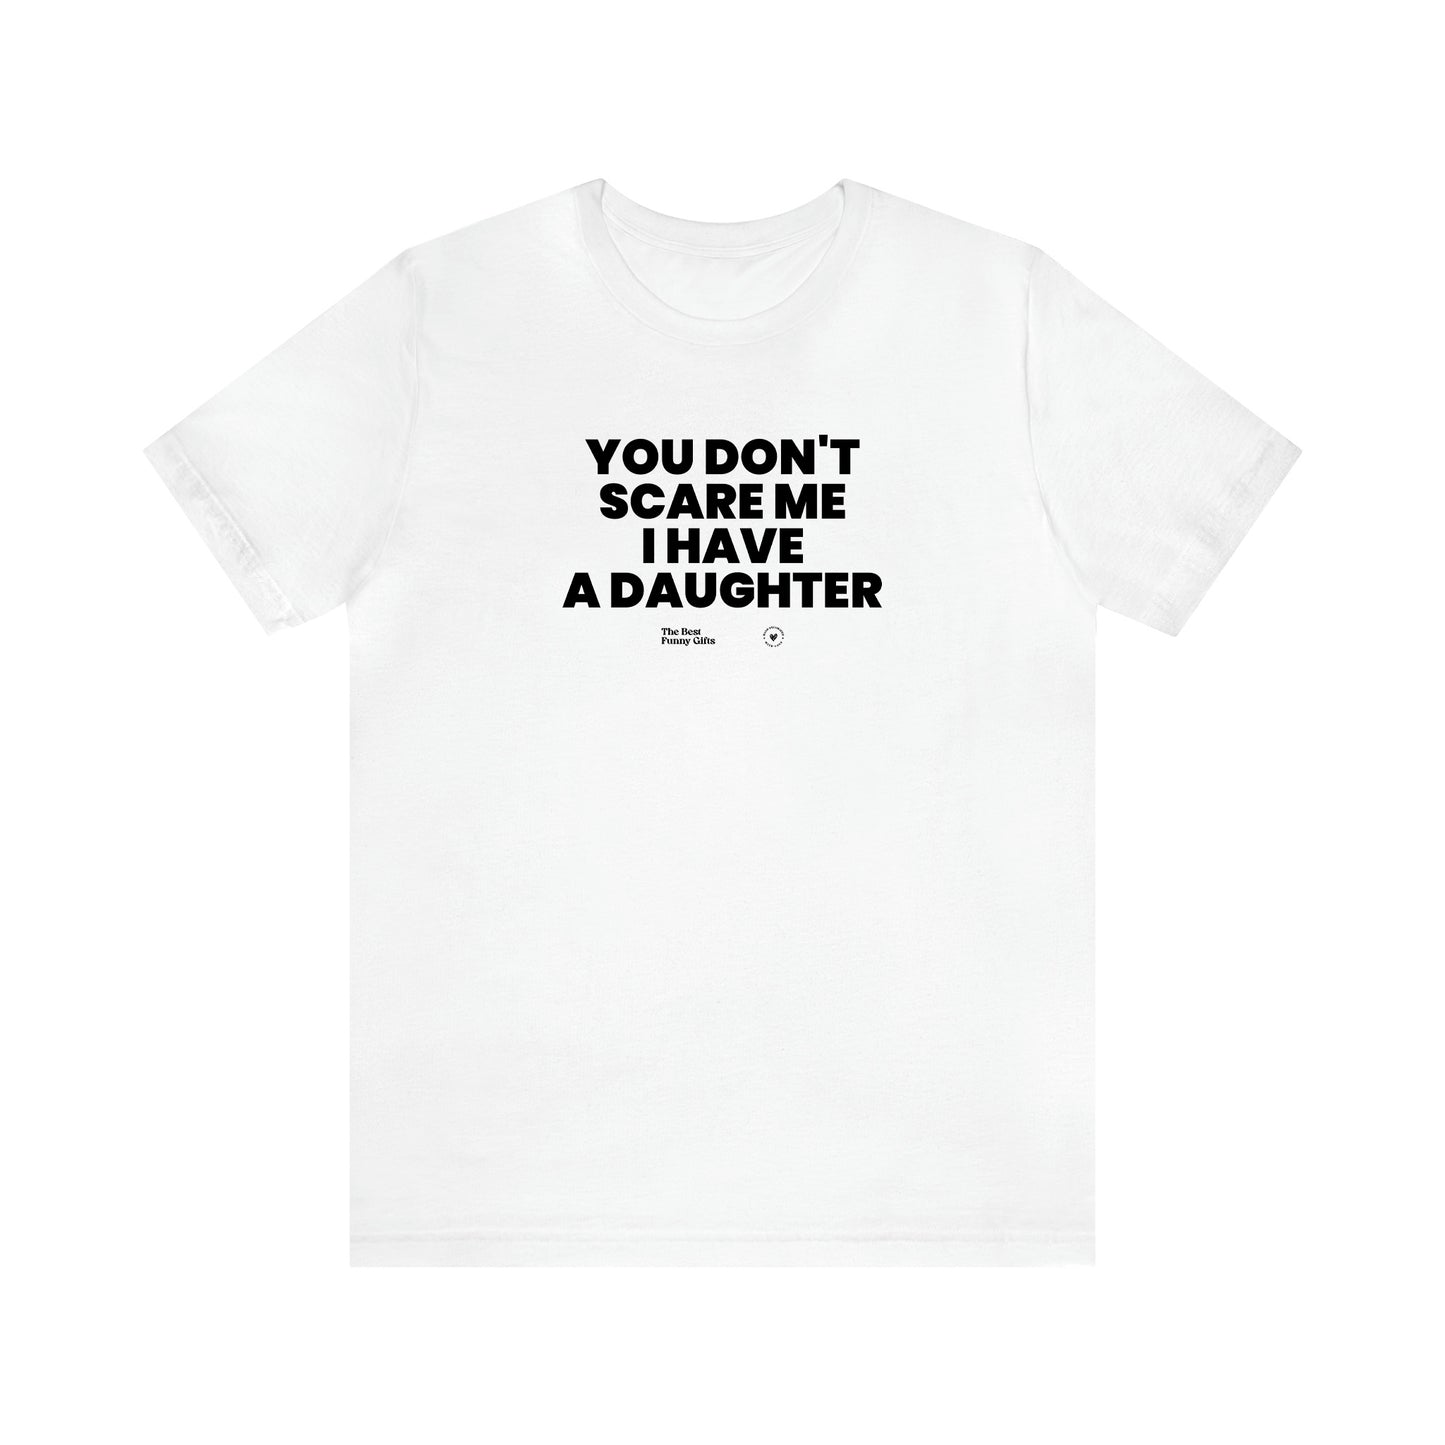 Men's T Shirts You Don't Scare Me I Have a Daughter - The Best Funny Gifts